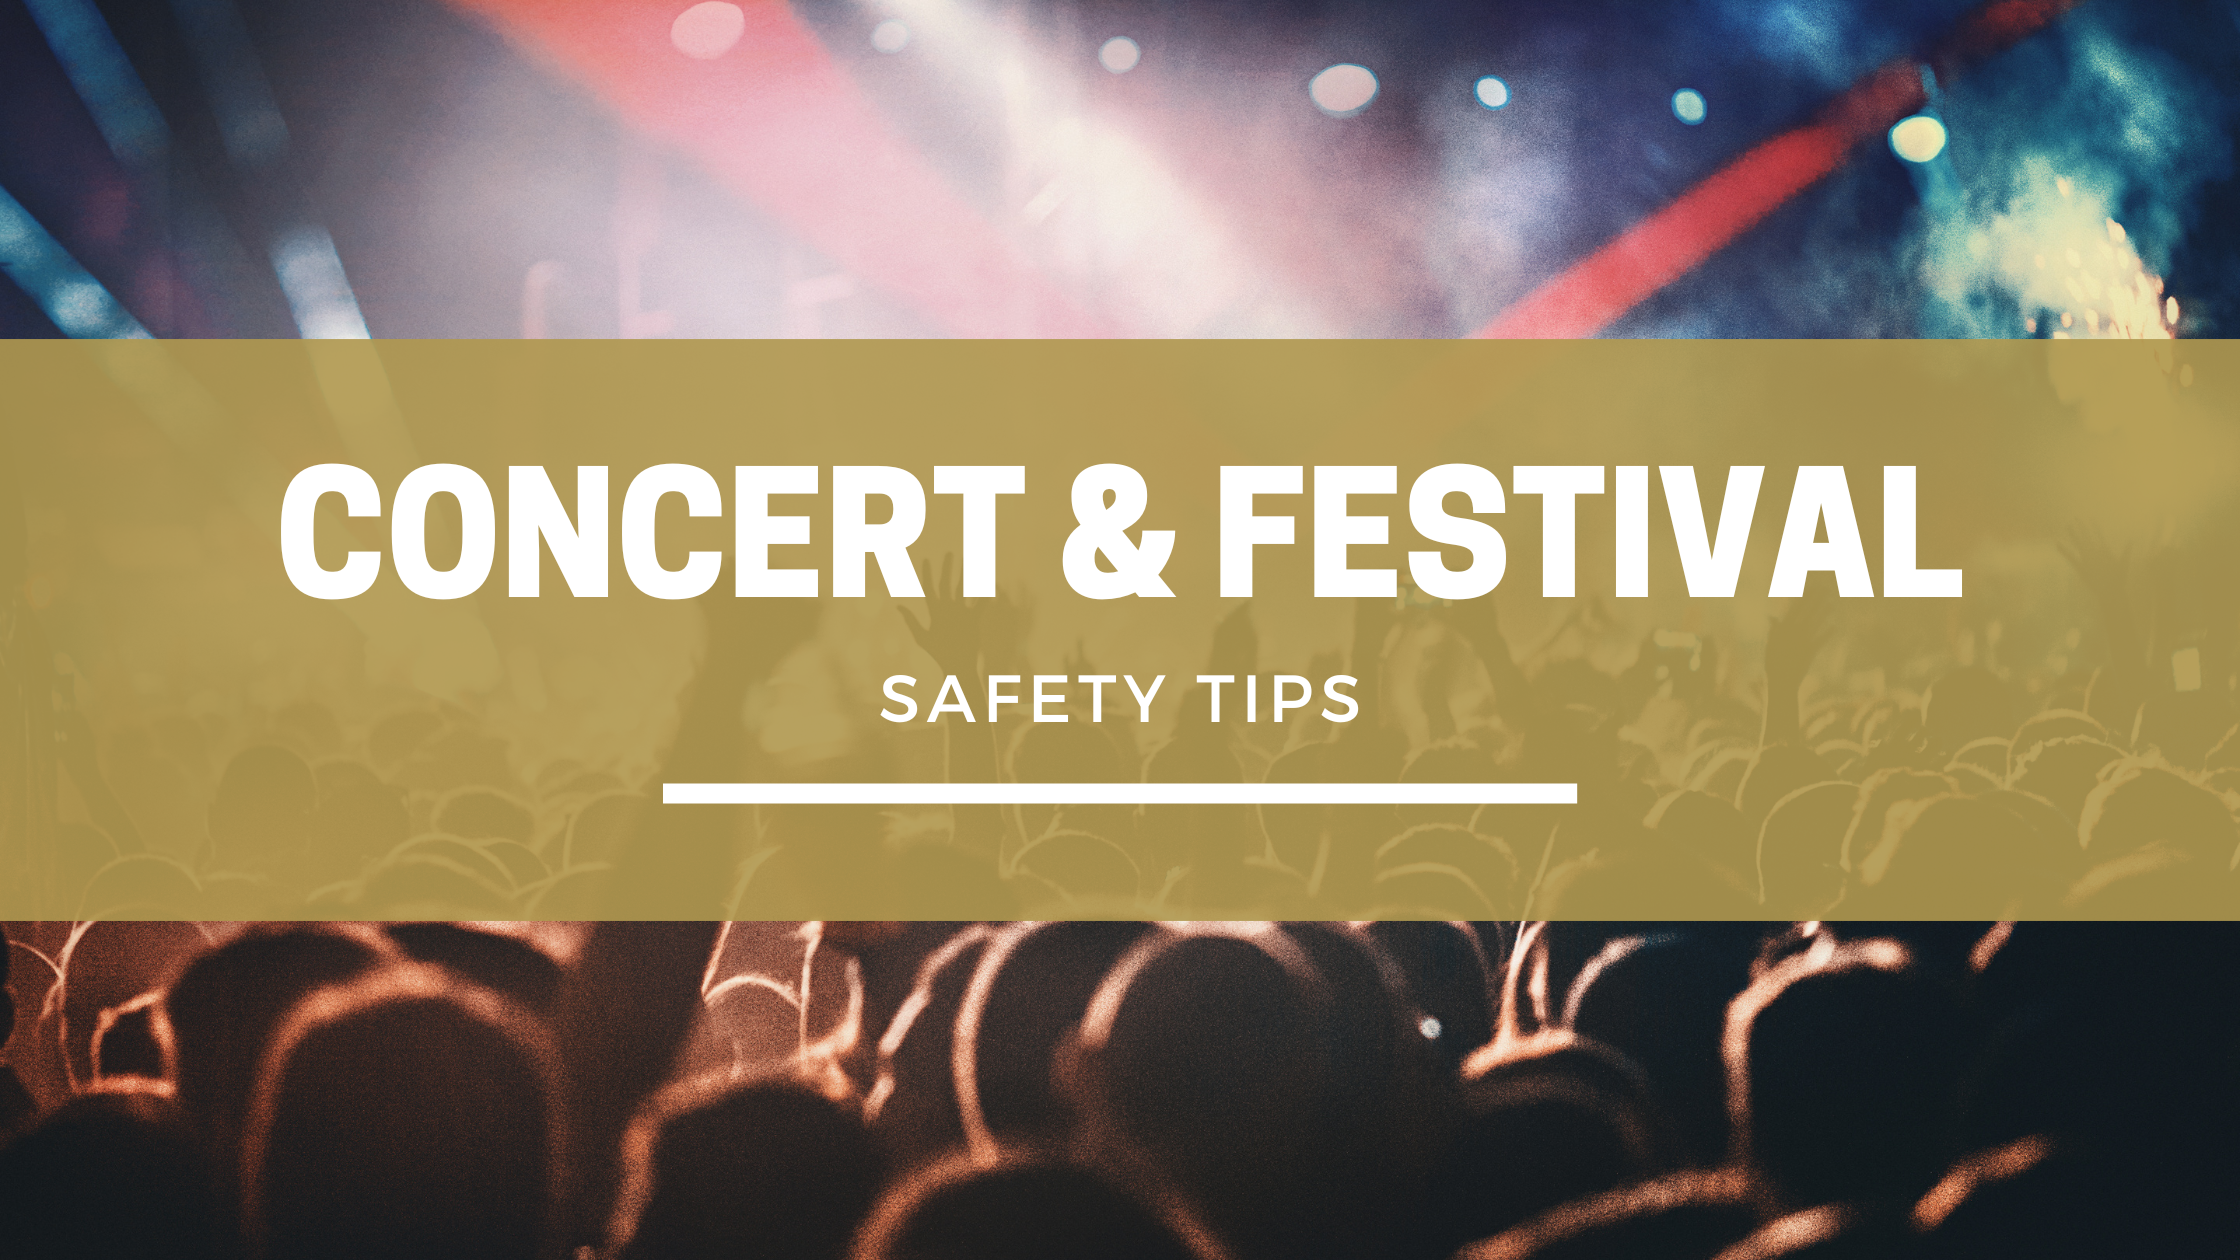 Concert Safety Tips: Have fun while being safe!